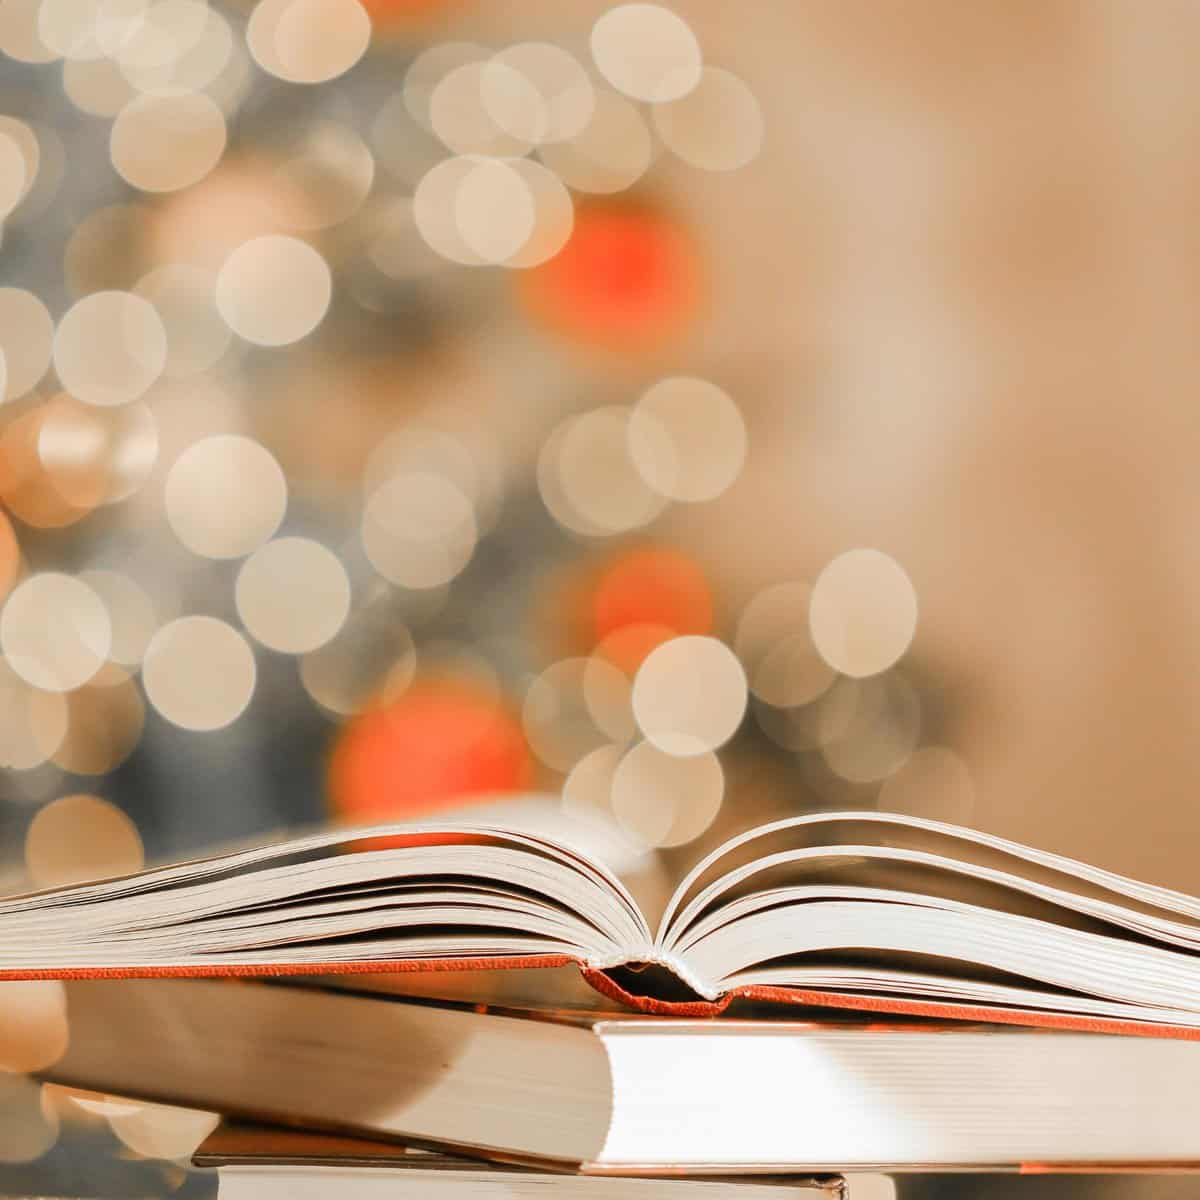 Finding Time To Read During The Busy Holiday Season